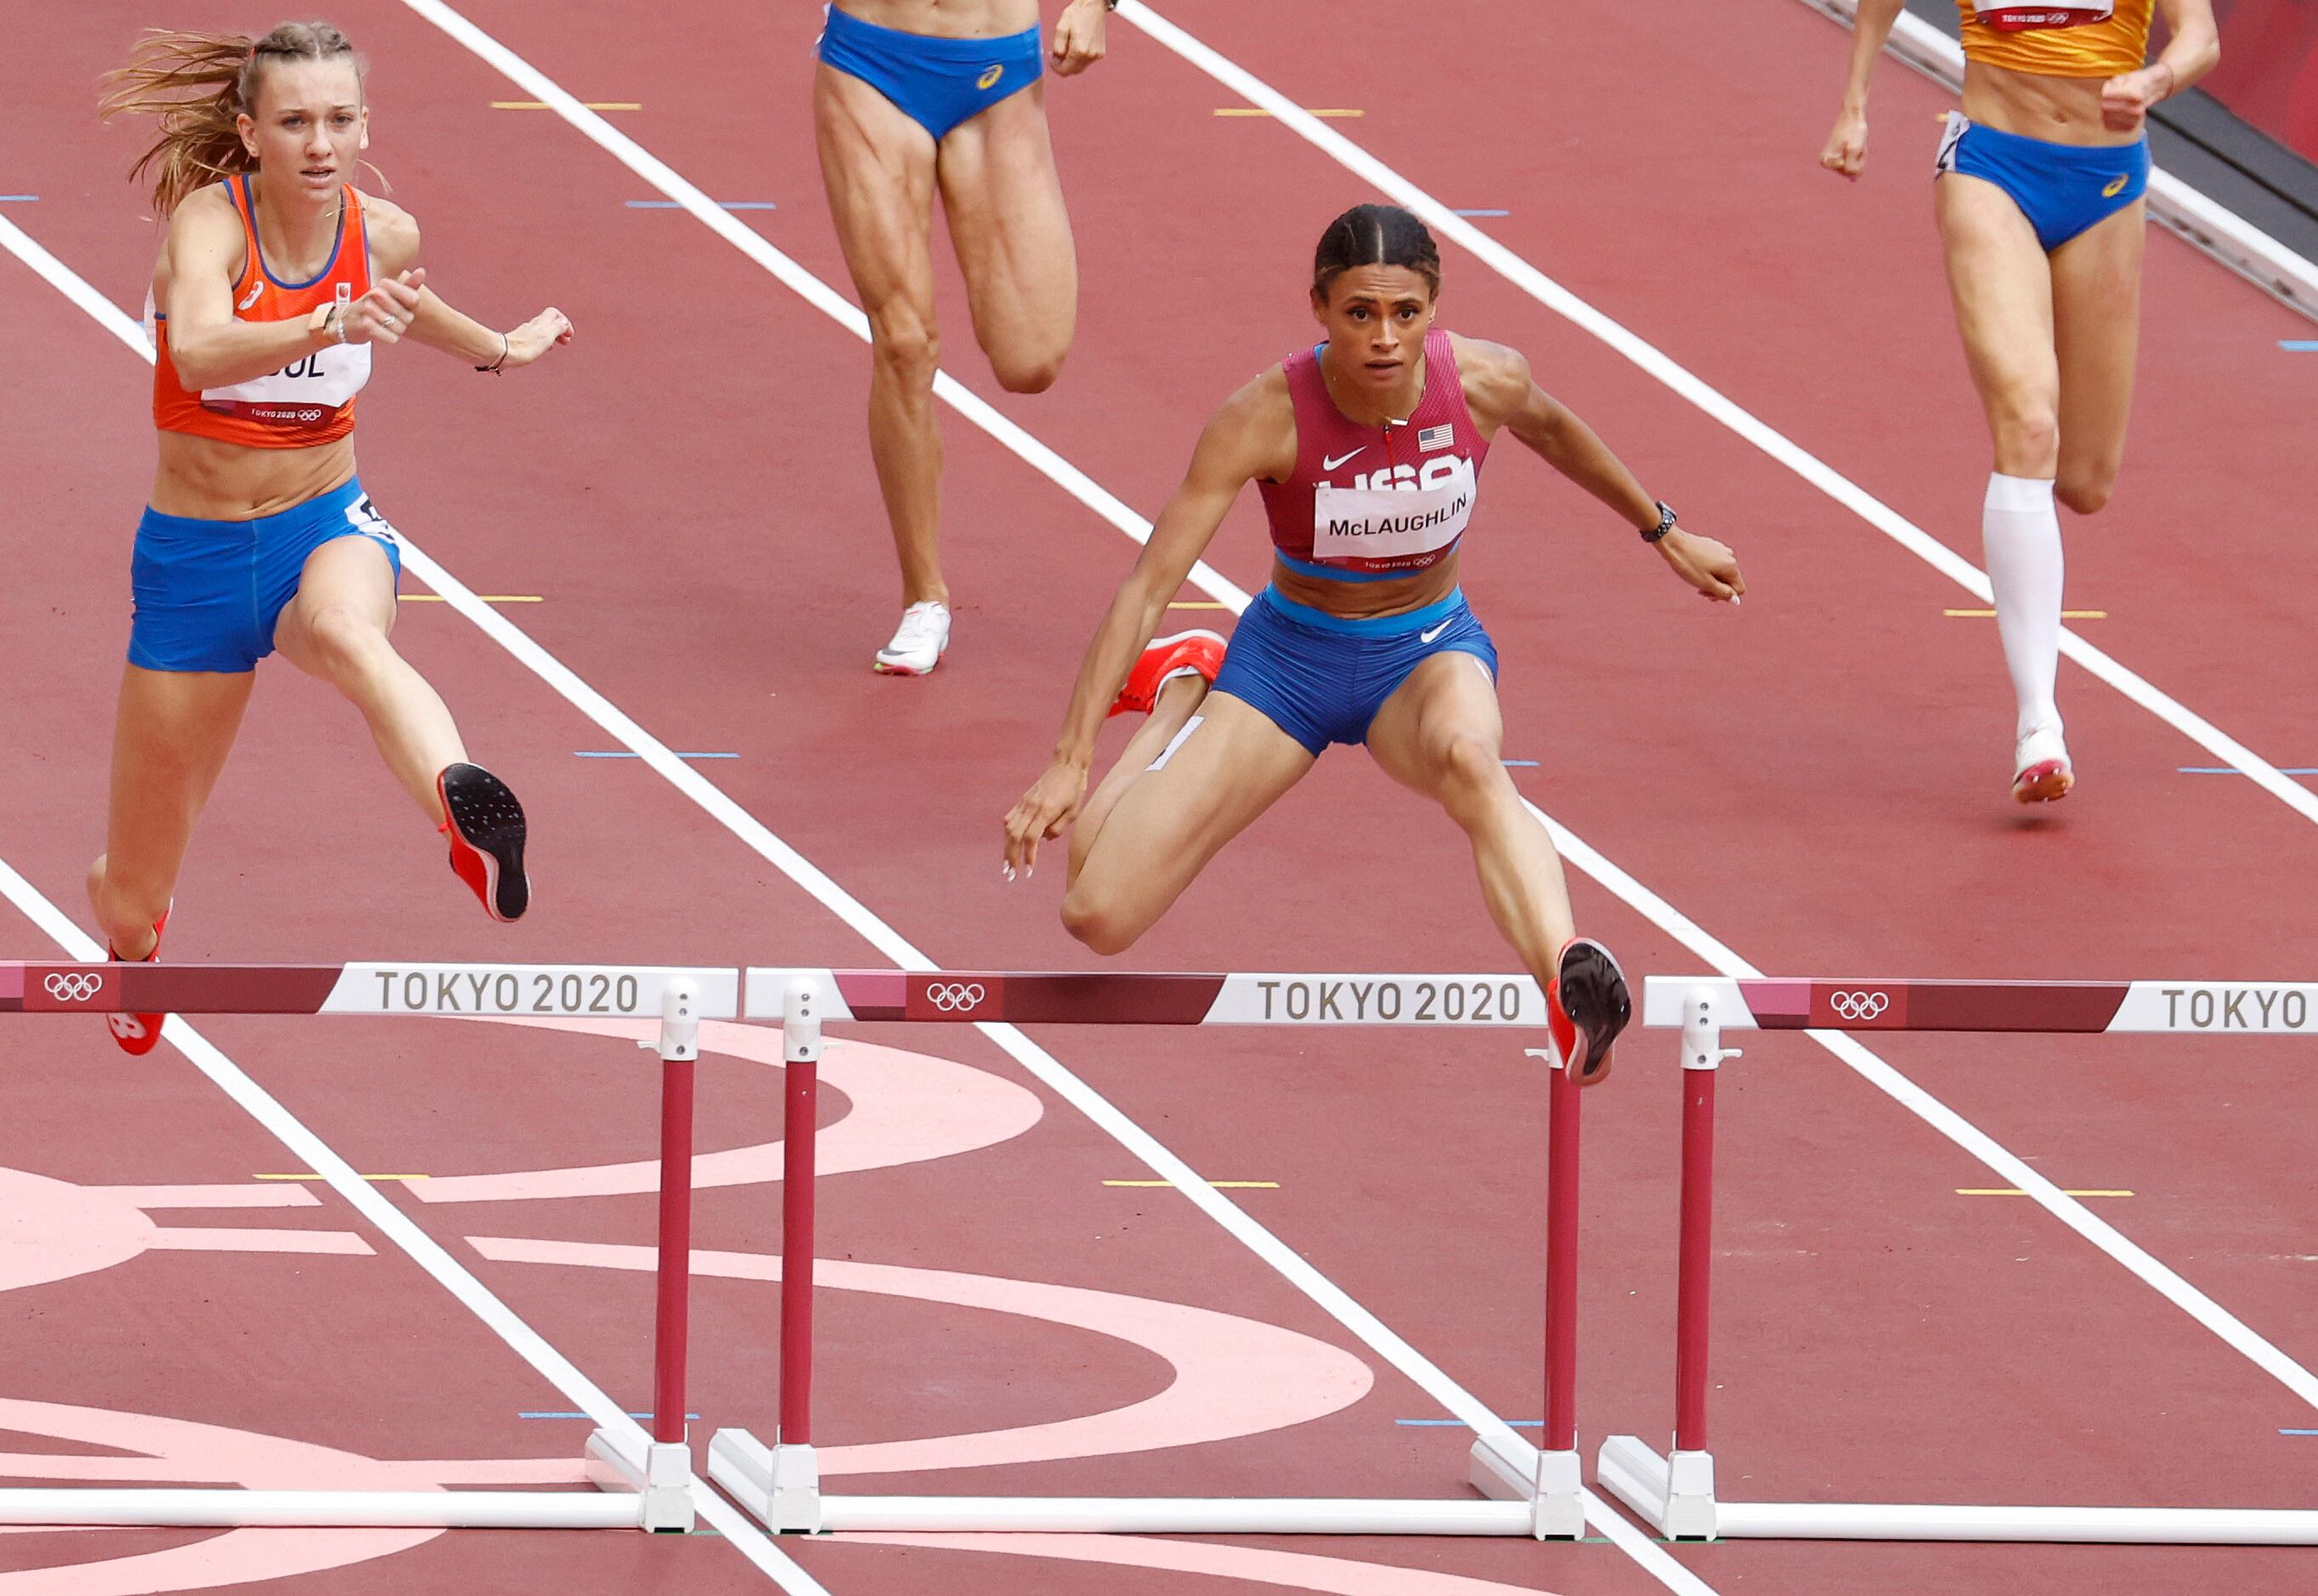 USA’s Sydney McLaughlin and the Netherland’s Femke Bol clear the last hurdle as they race to...